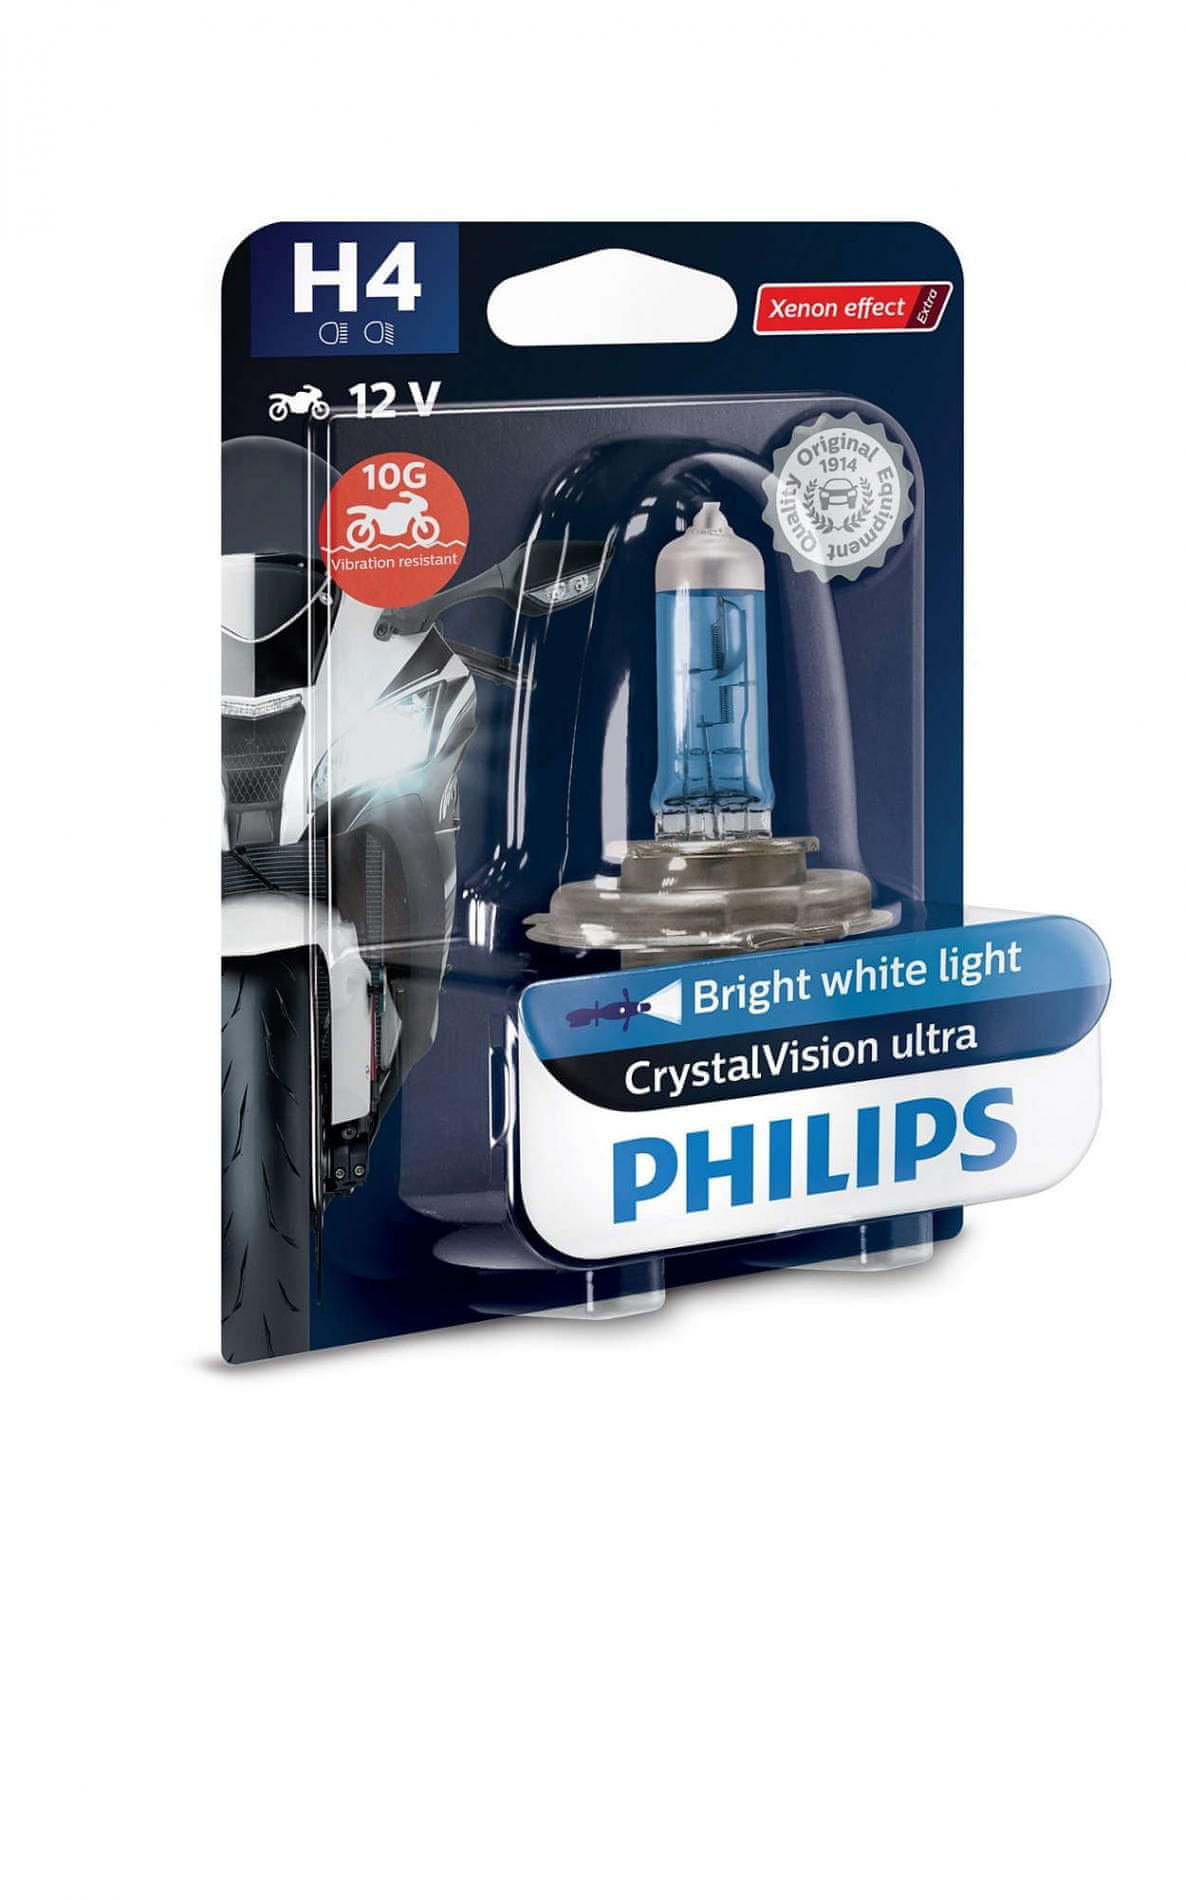 Ampoule H7 WhiteVision ultra PHILIPS 12V 55W 4200K - 12972WVUB1